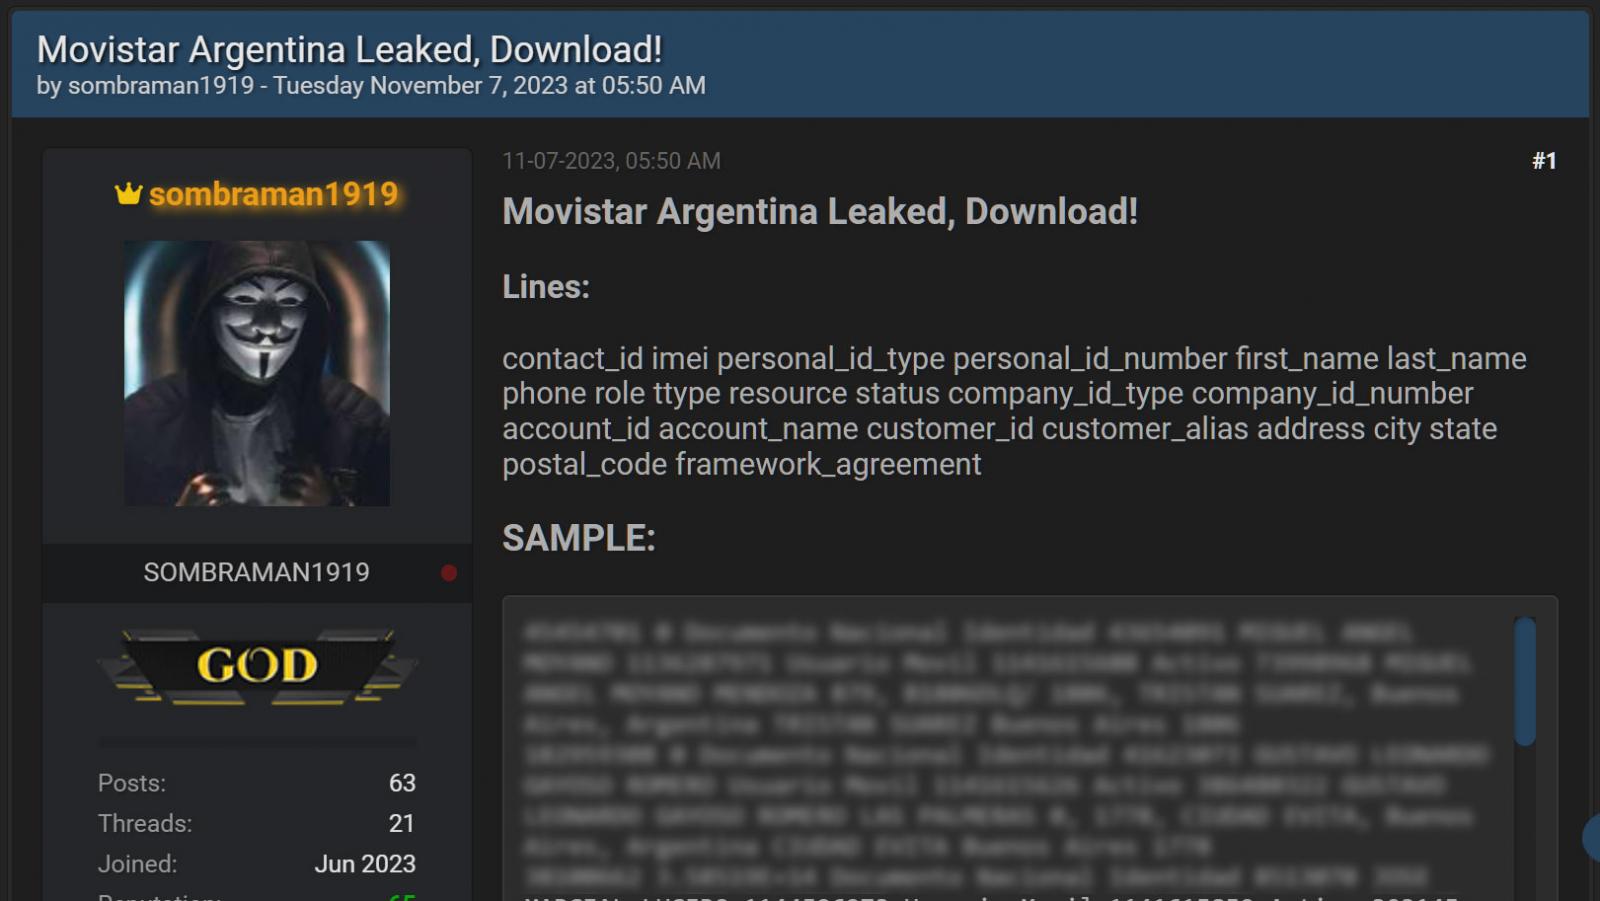 Stolen Movistar data for Argentinians leaked on a hacking forum